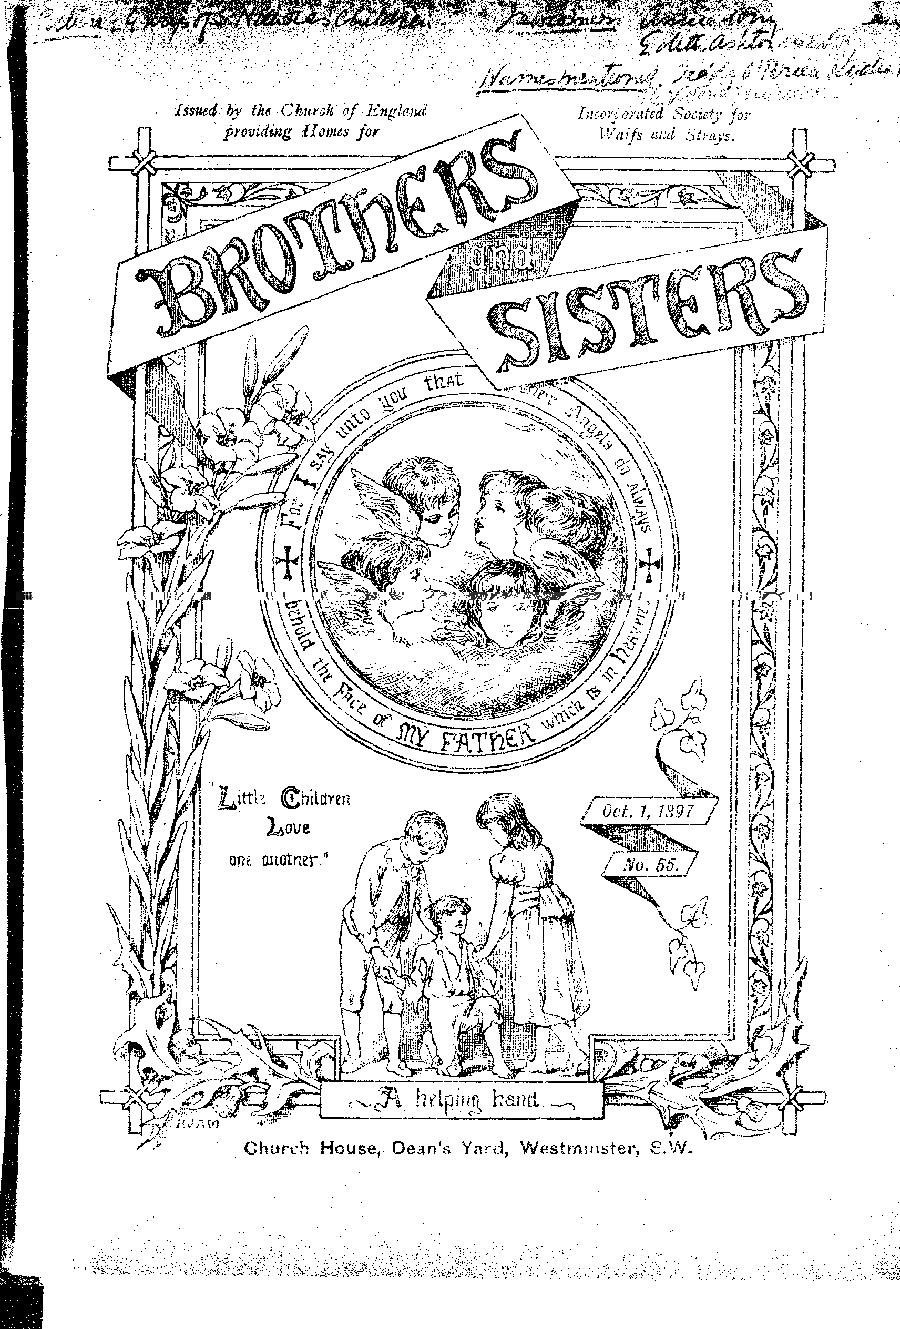 Brothers and Sisters October 1897 - page 1